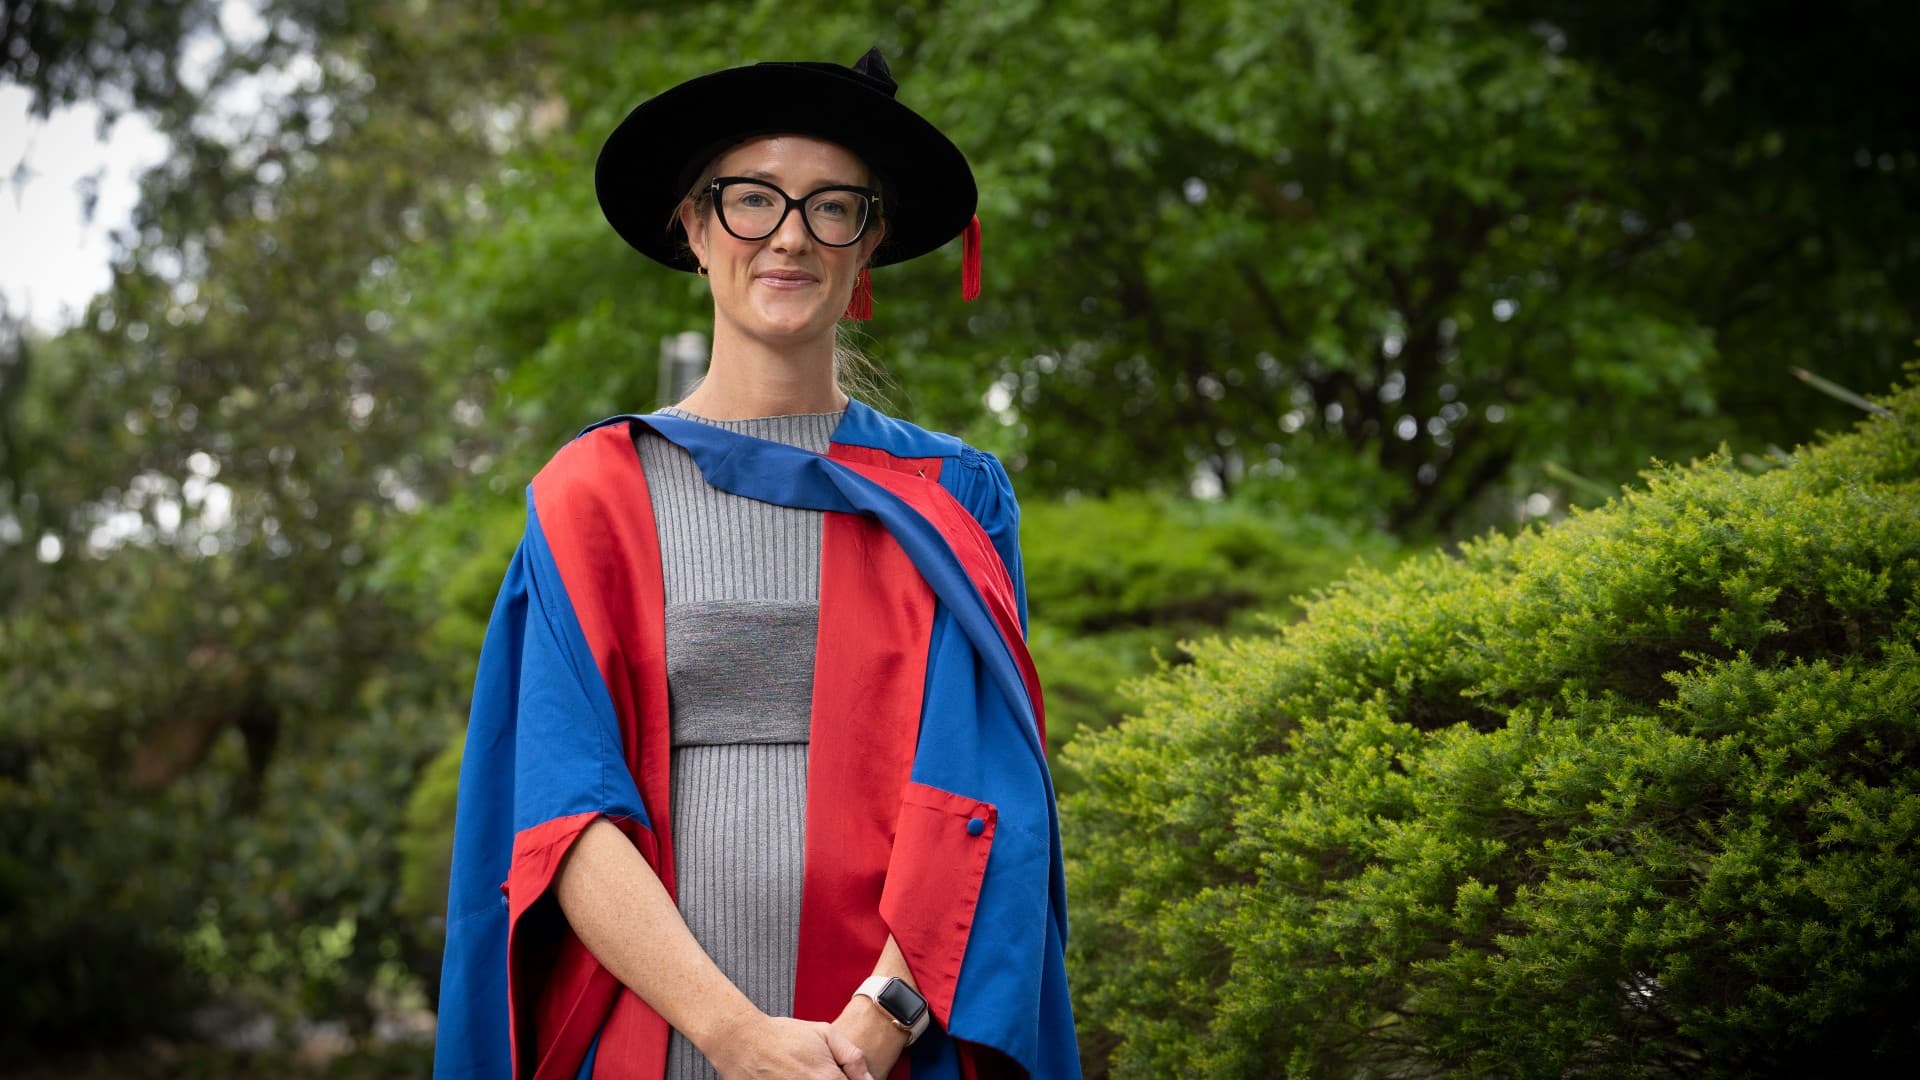 Dr Carmen Naylor, wearing a grey dress and the blue and red graduation gown, stands in front of a green, bush background. Photo: Paul Jones